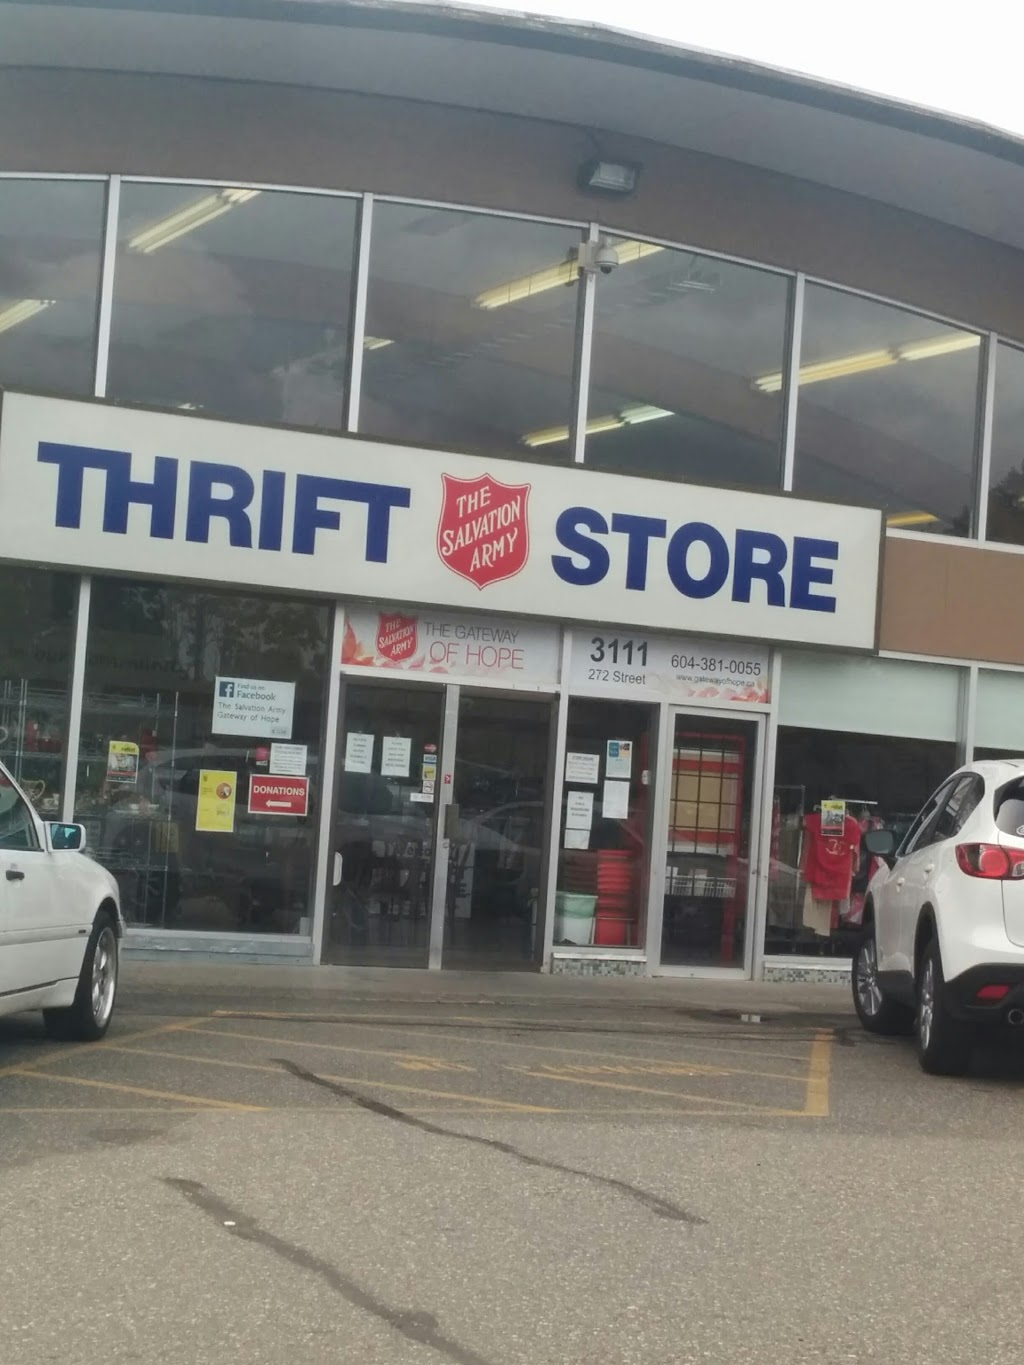 Salvation Army Thrift Store | store | 3111 272 St, Aldergrove, BC V4W 3R9, Canada | 6043810055 OR +1 604-381-0055